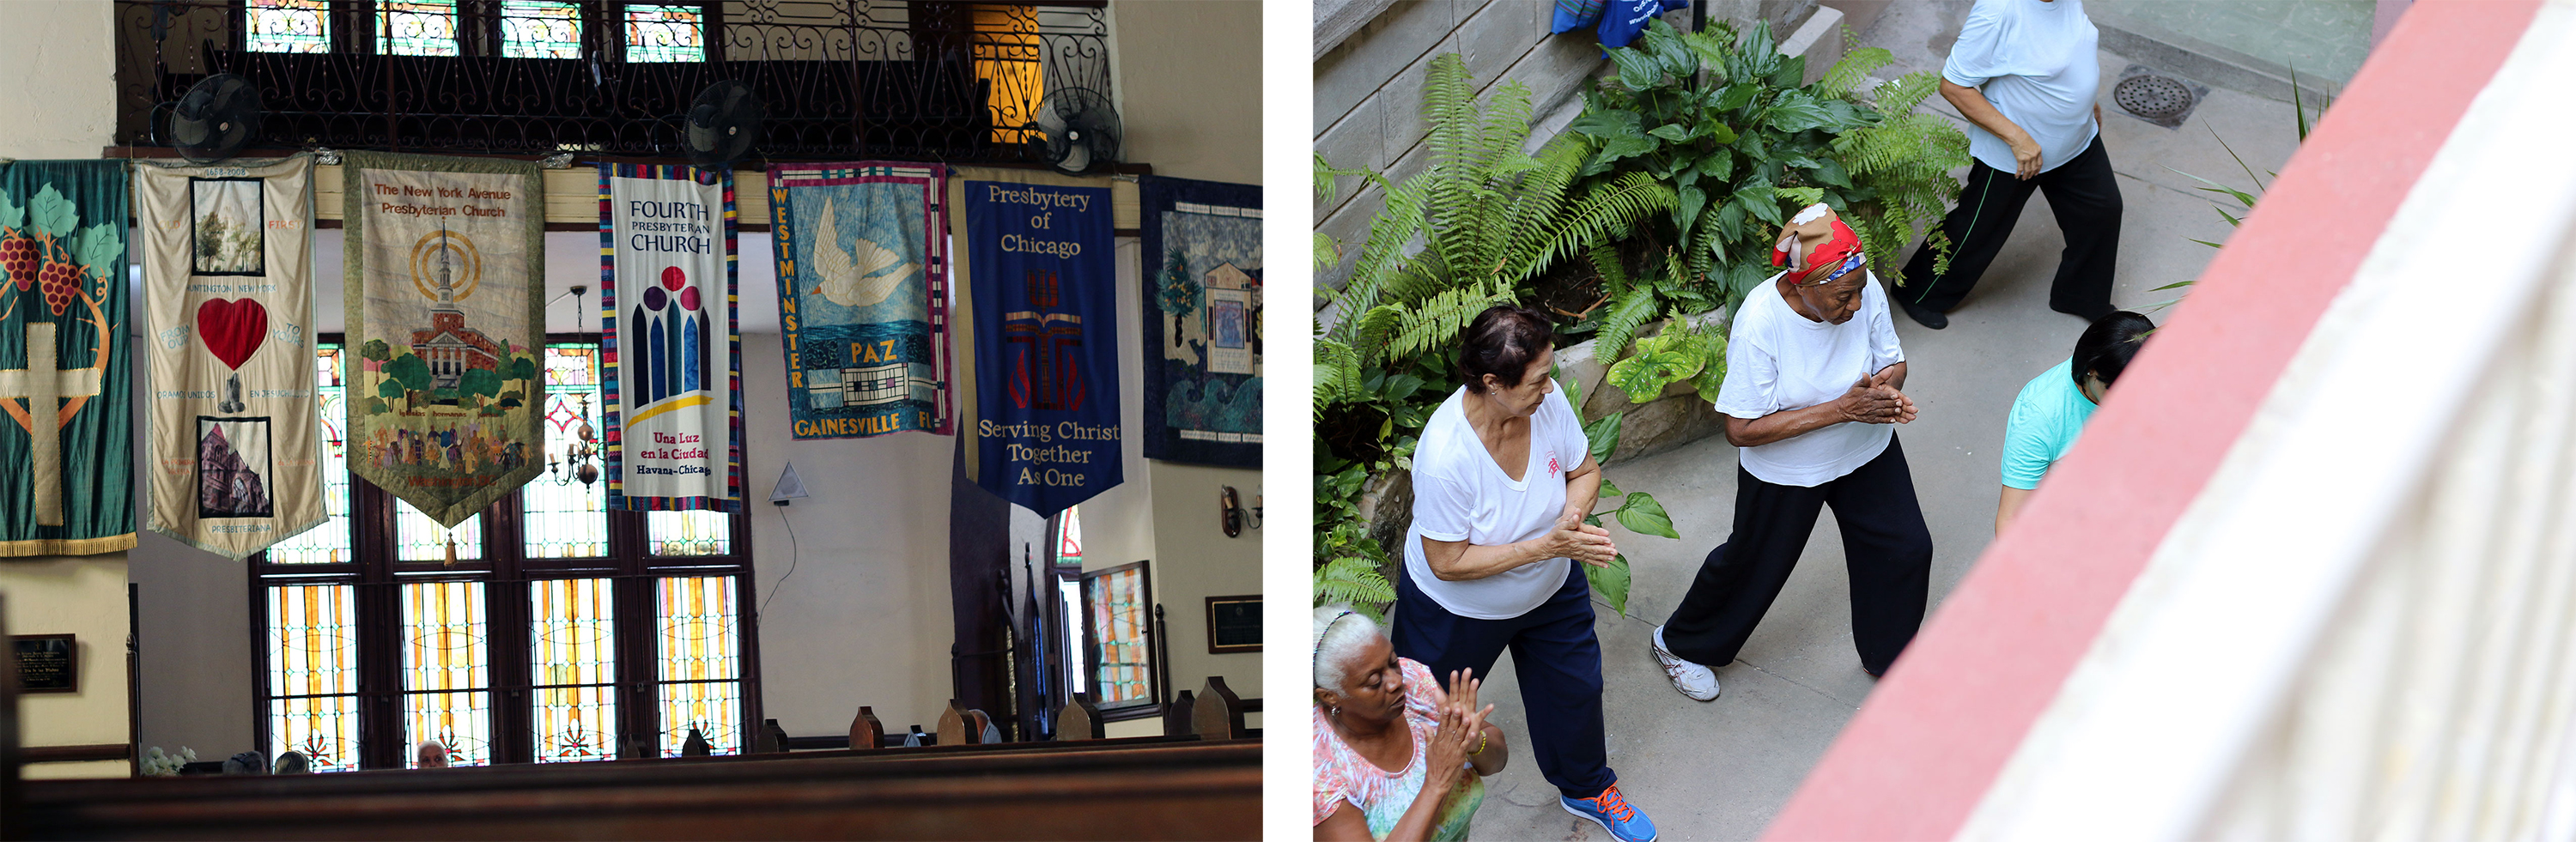 Left: Banners of partner churches in the United States hang along the rear balcony of the sanctuary. (Photo by Fred Tangeman) | Right: This urban church serves the local community in a myriad of ways including a weekly yoga session. (Photo by Randy Hobson)